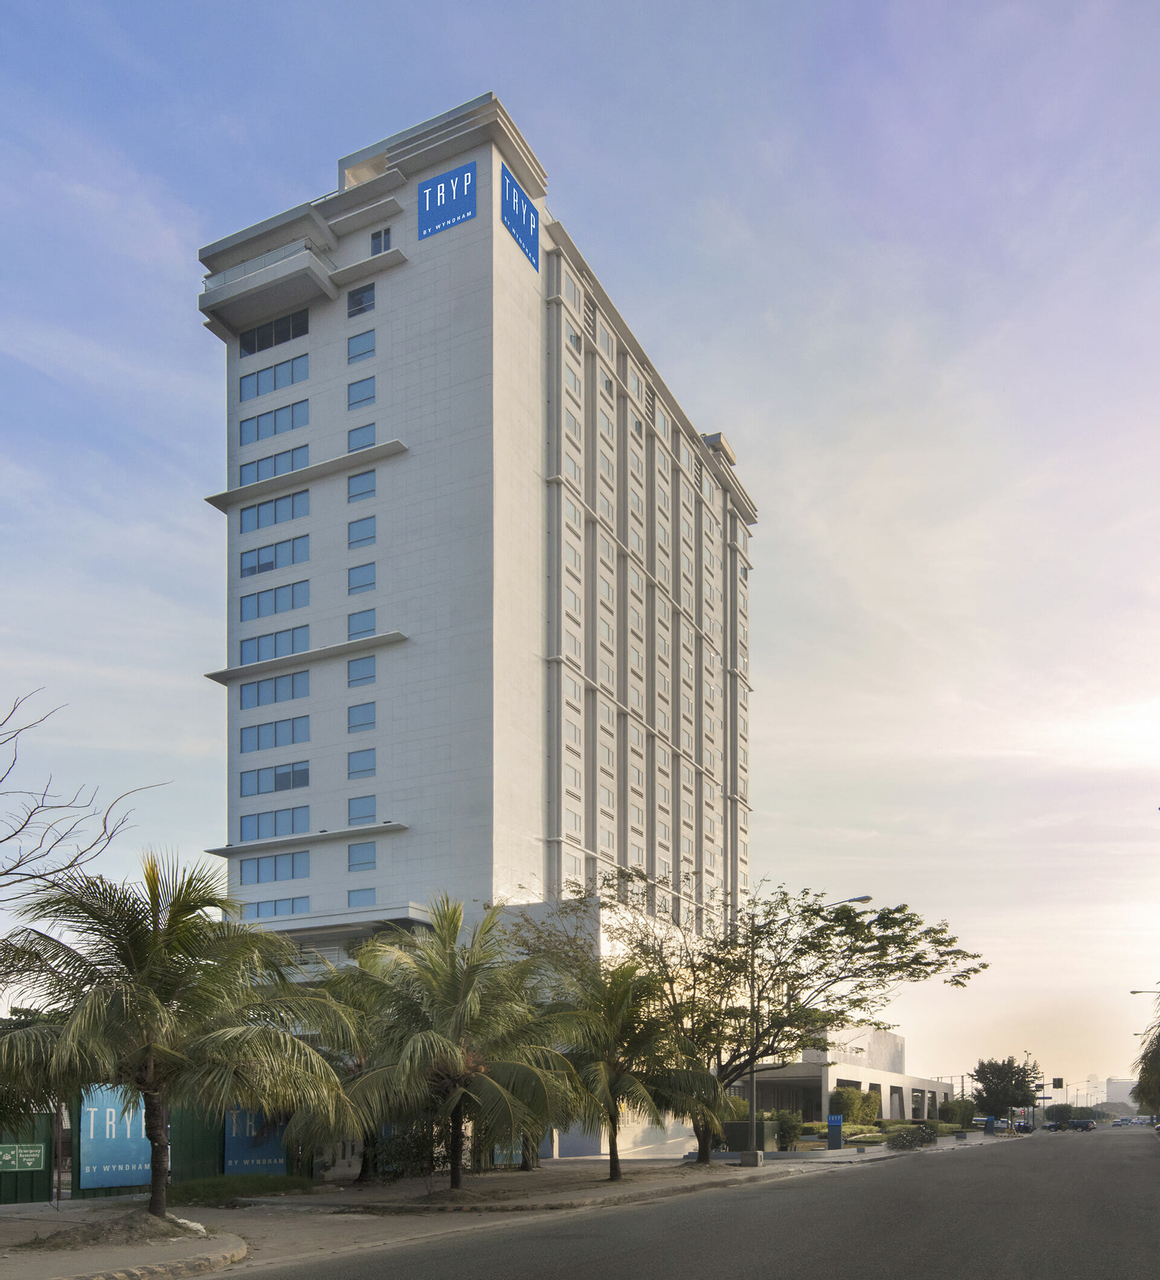 Exterior & Views 1, TRYP by Wyndham Mall of Asia Manila, Pasay City